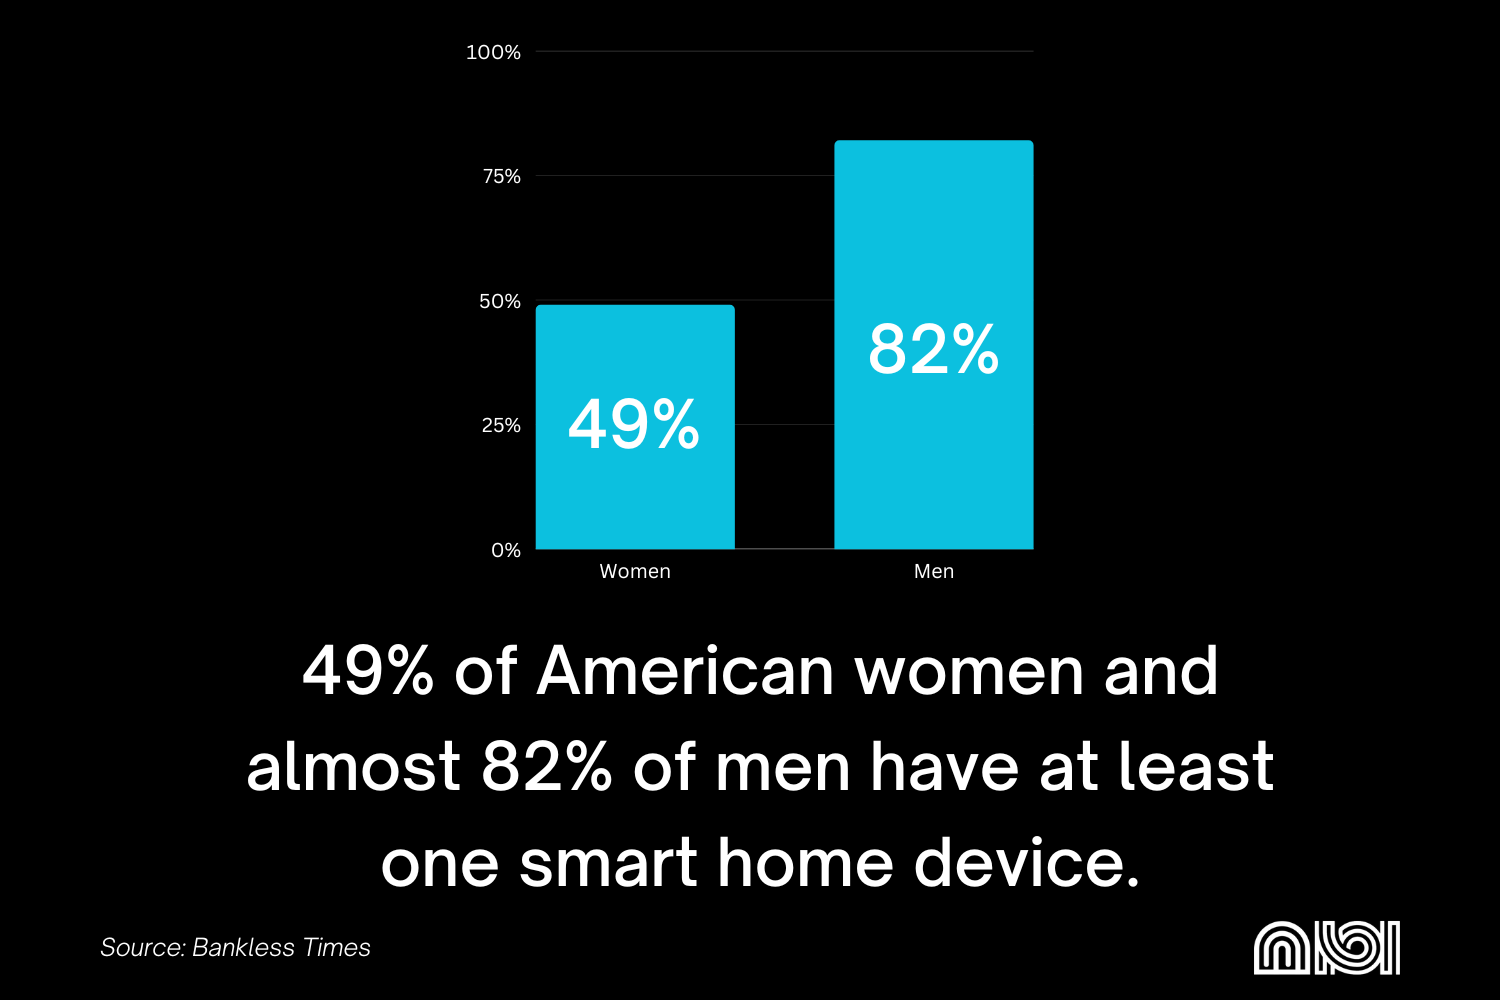 Gender-based smart home device ownership: 49% of American women and 82% of American men